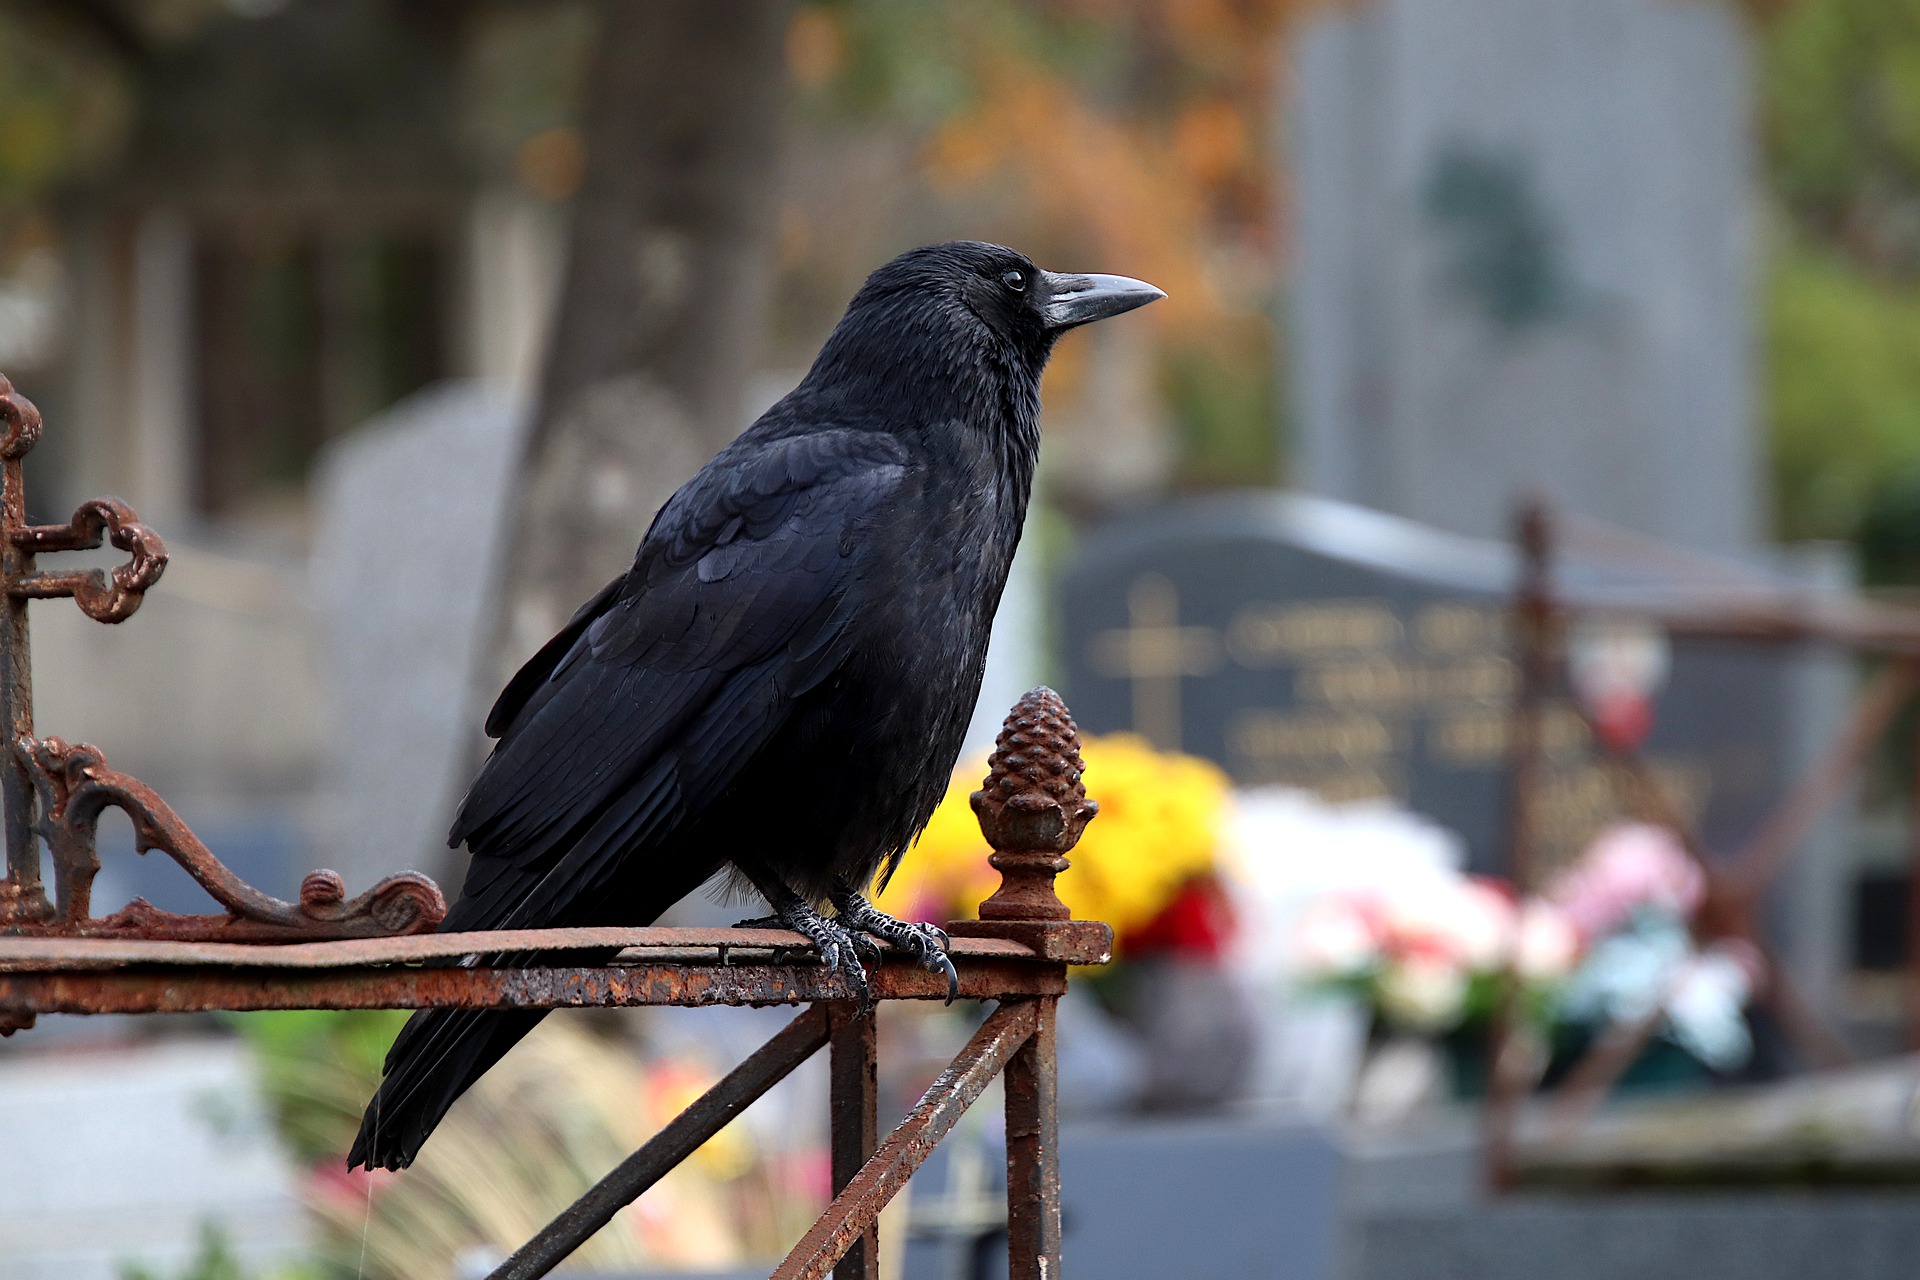 Crow Meaning - The Actual Meaning Of Crows